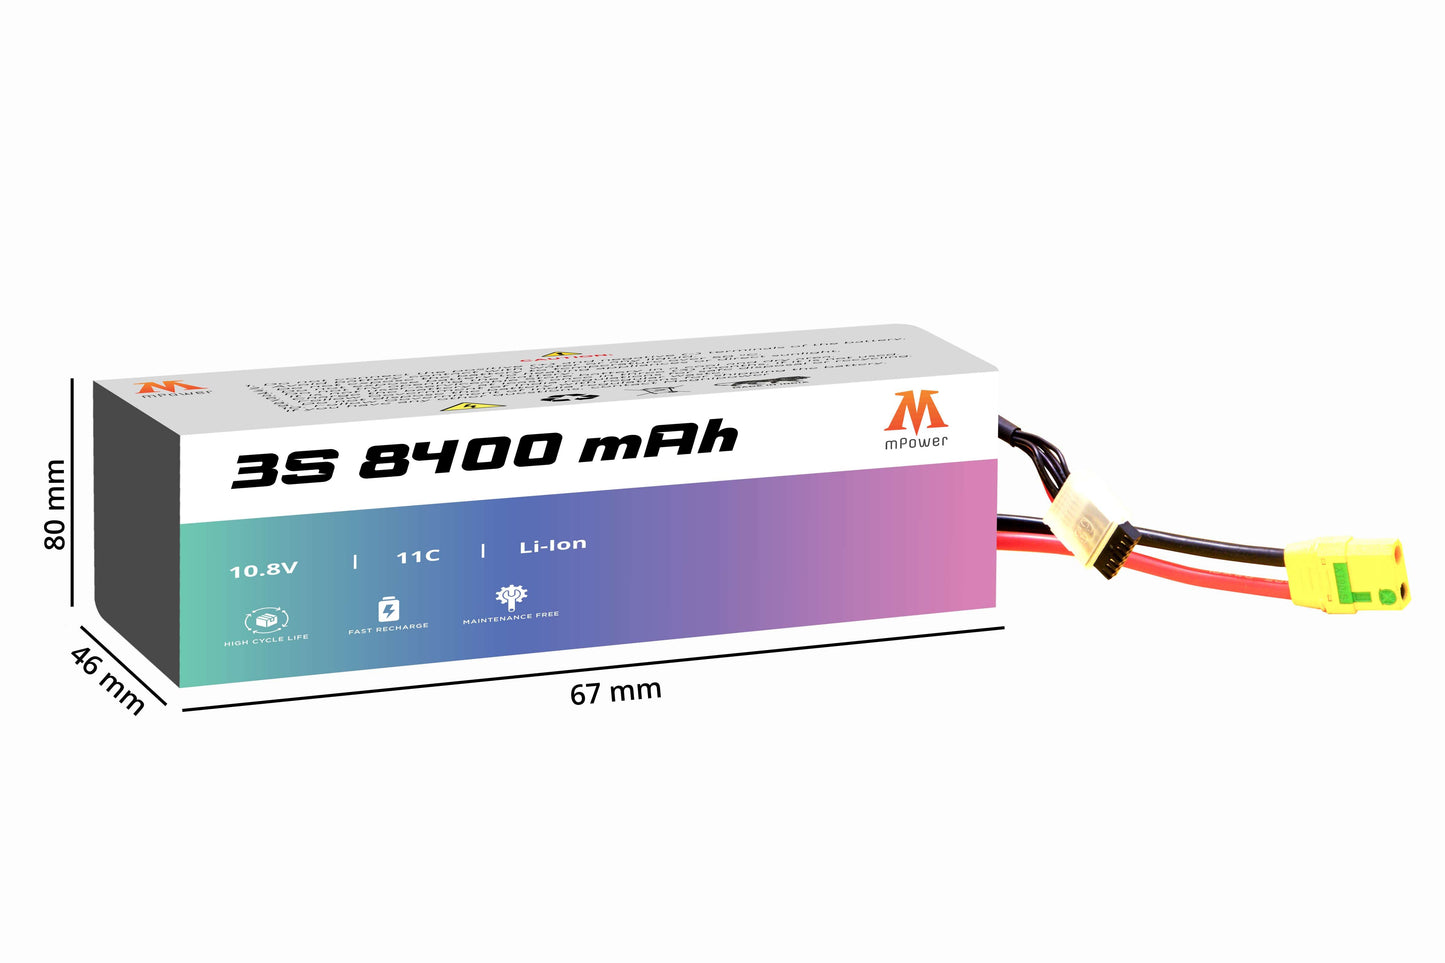 mPower 3S 8400mAh Lithium-Ion Battery for Surveillance Drones